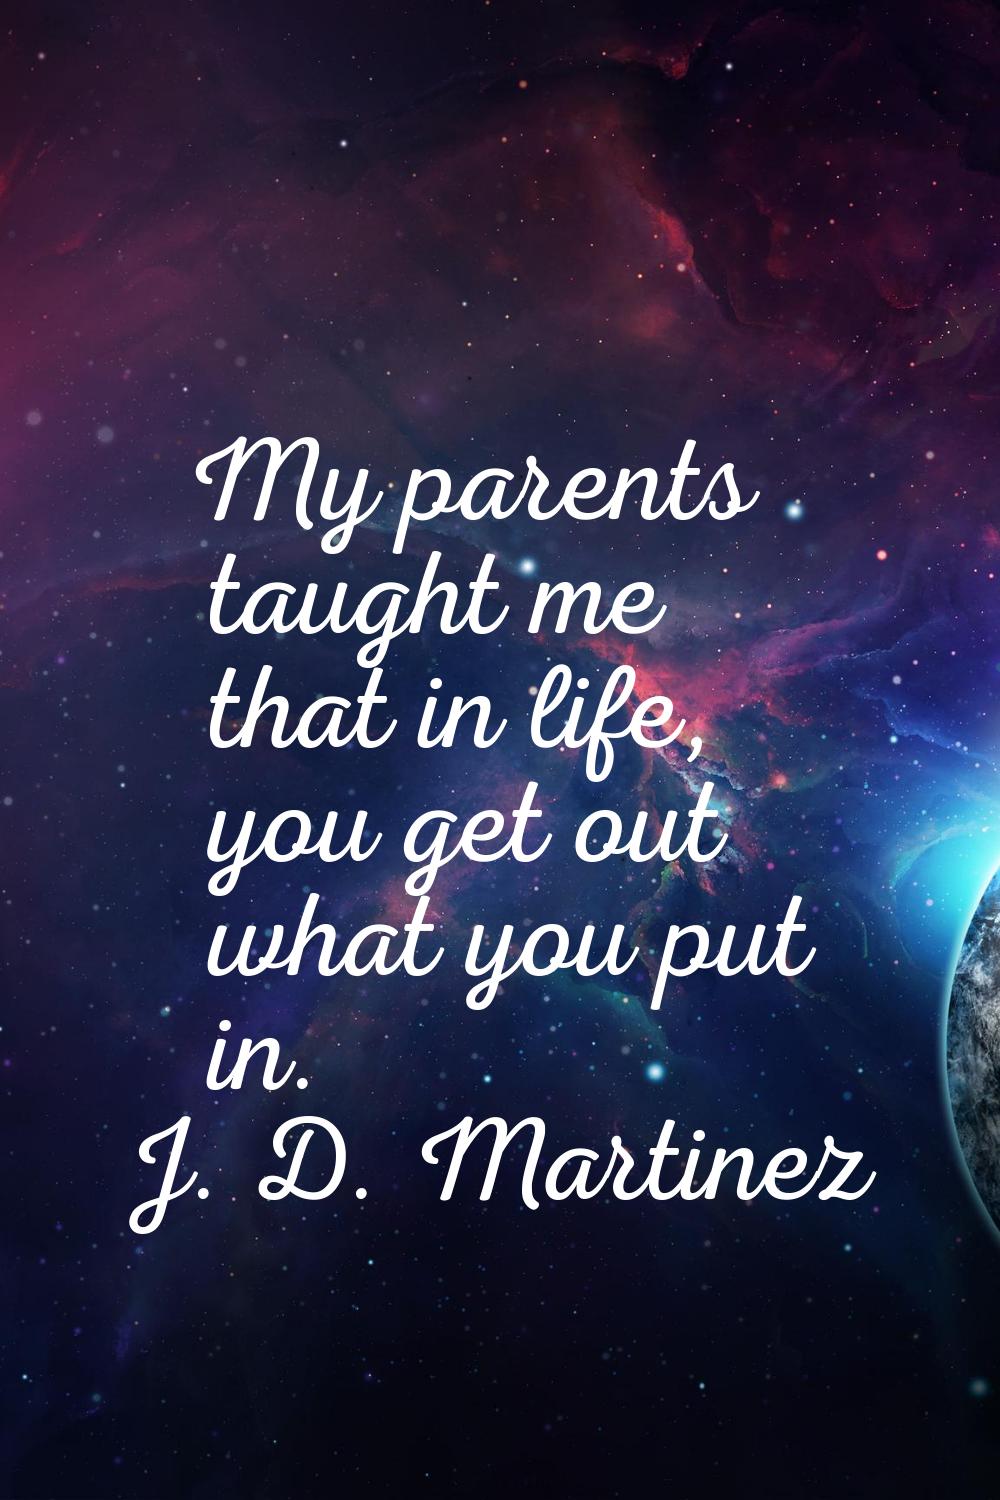 My parents taught me that in life, you get out what you put in.